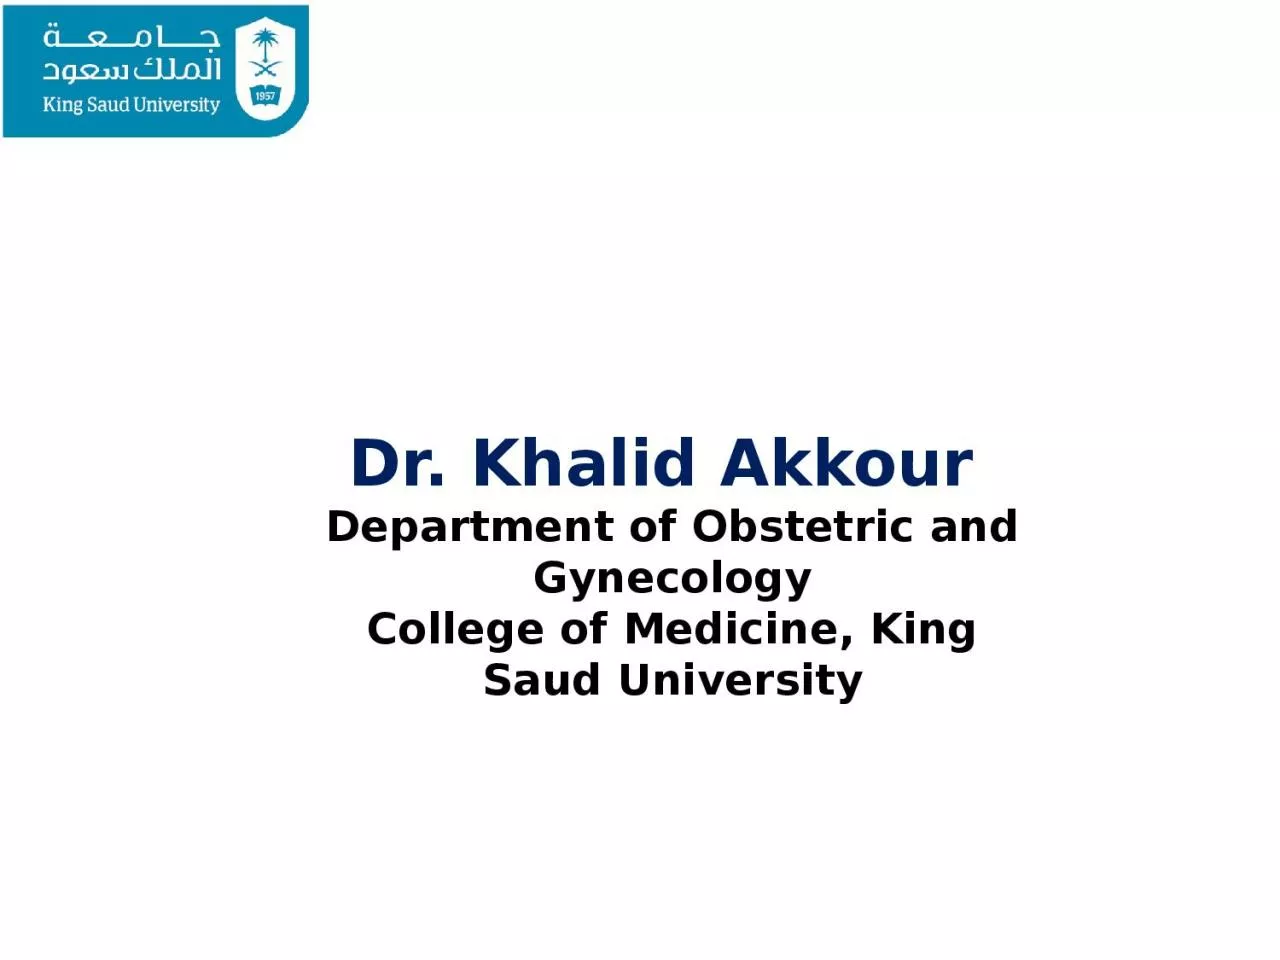 Dr. Khalid  Akkour   Department of Obstetric and Gynecology